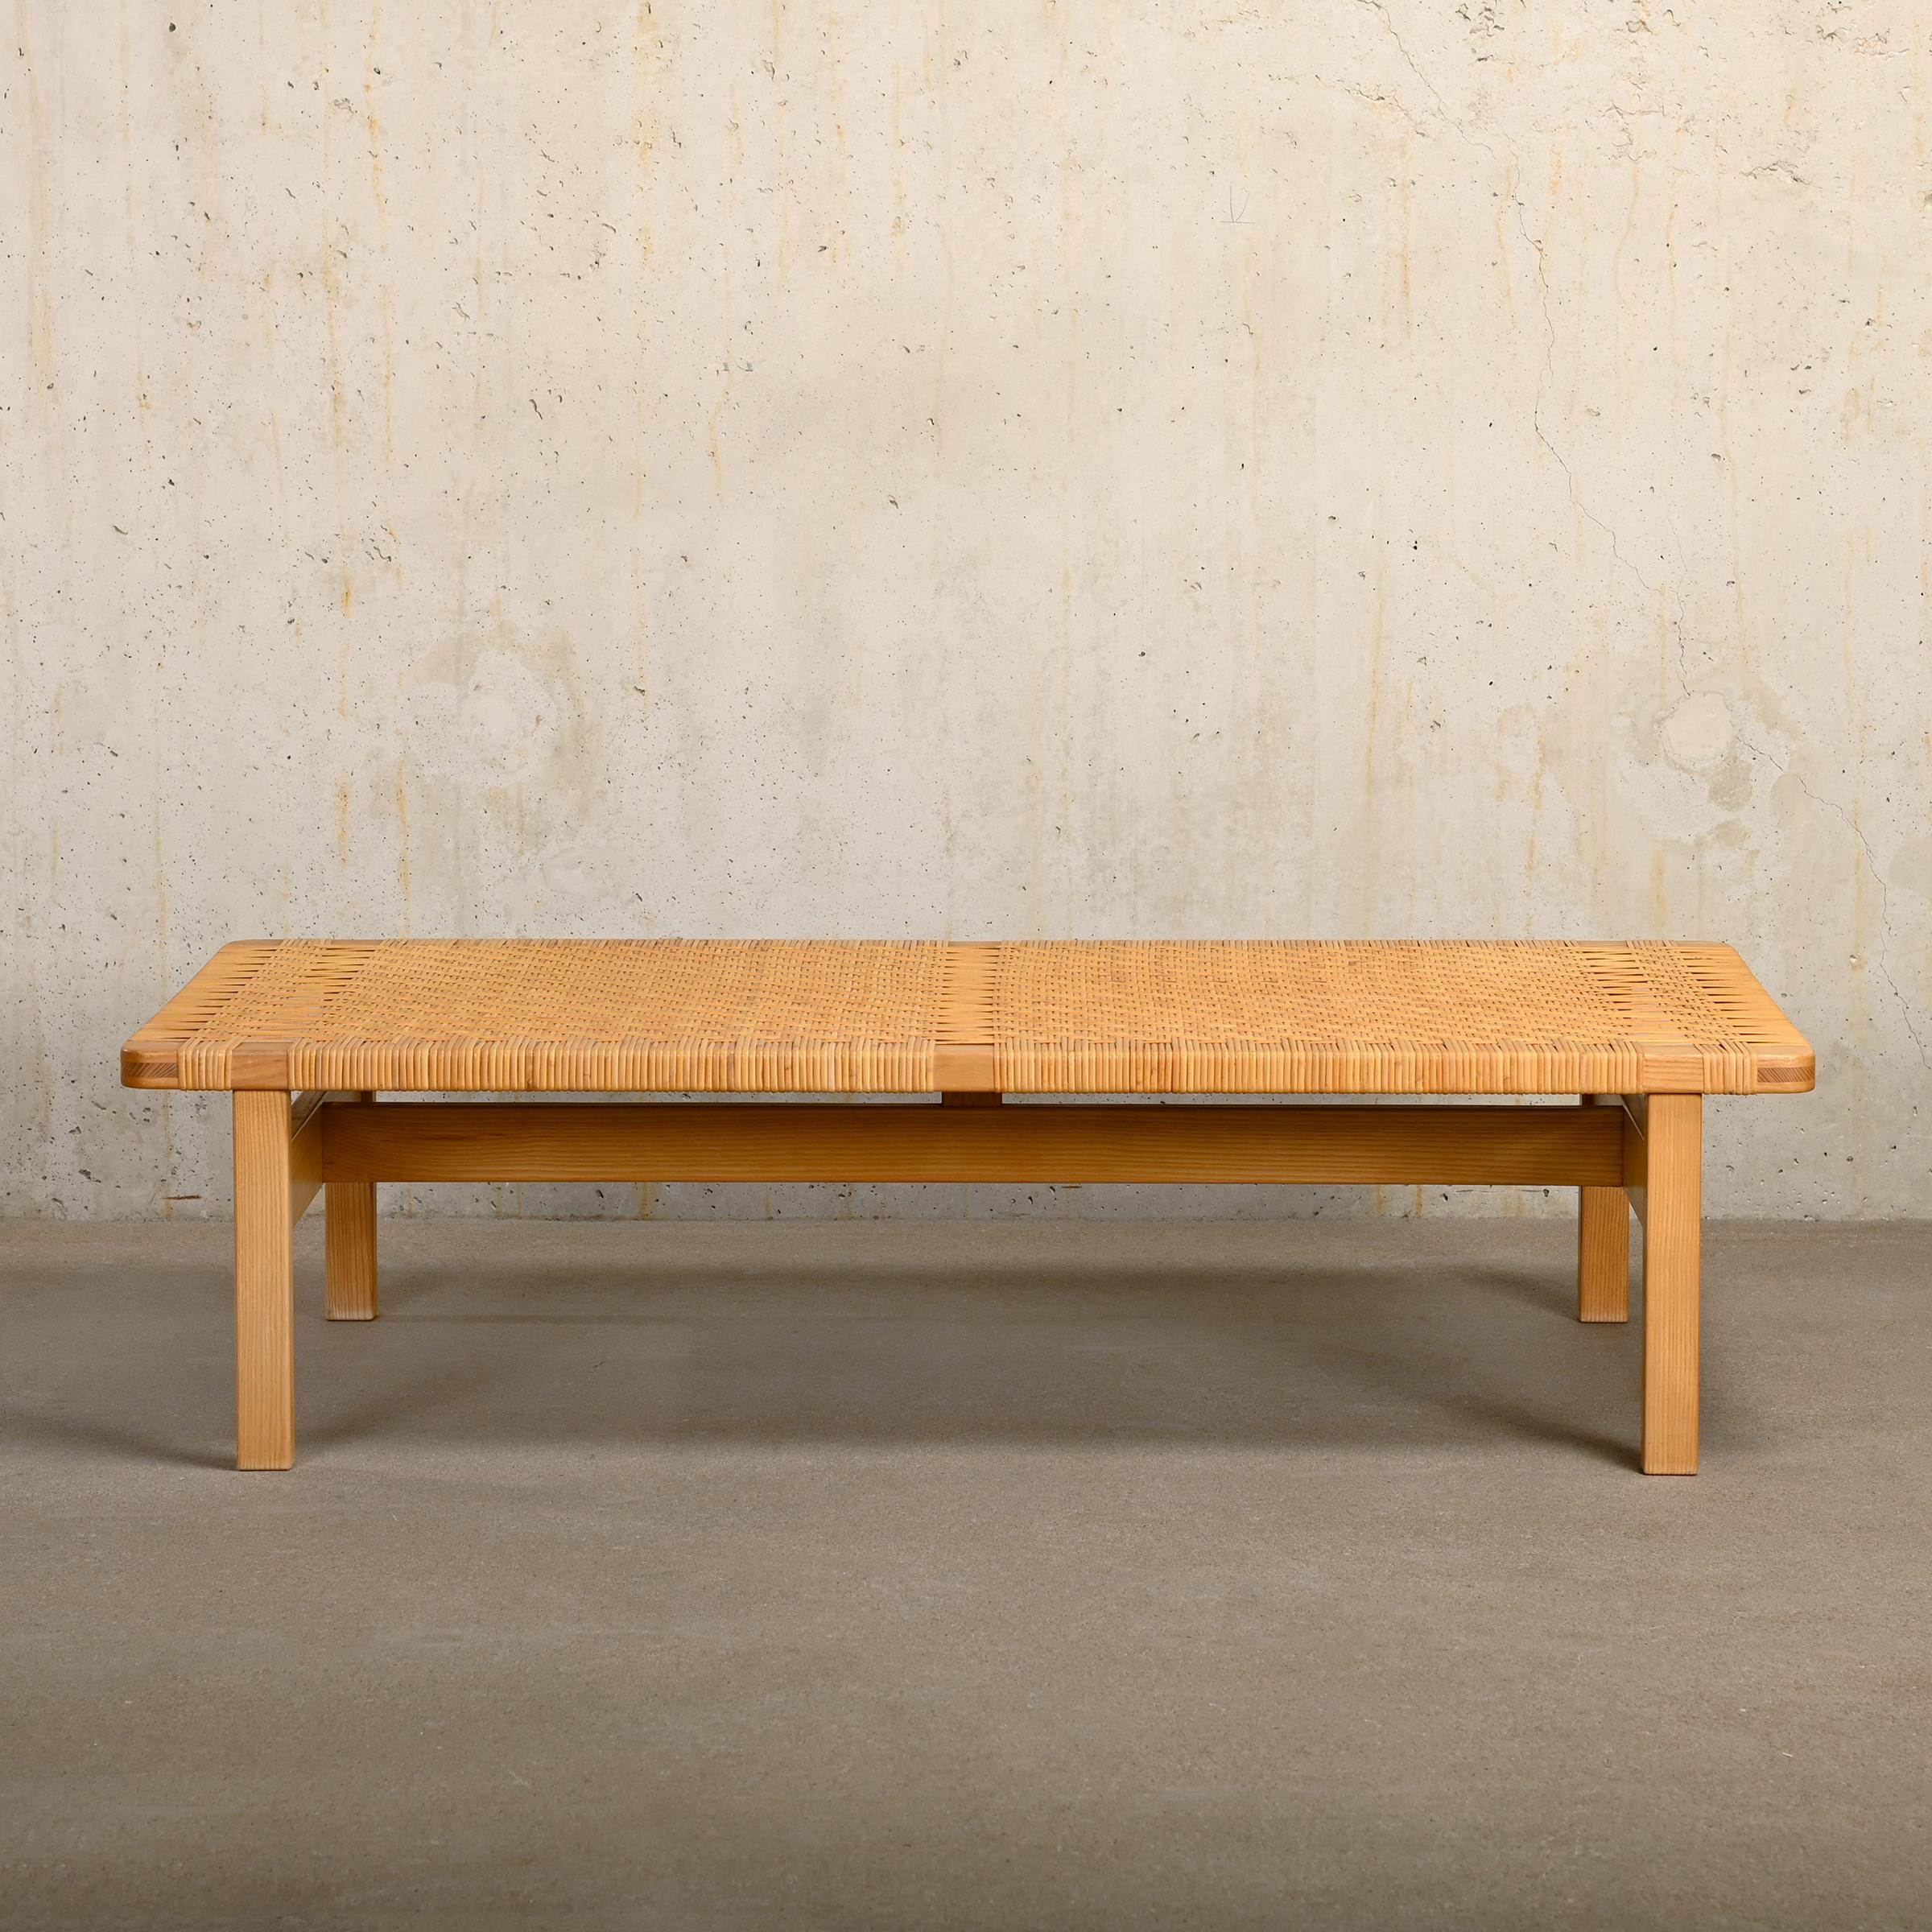 Scandinavian Modern Børge Mogensen Bench or Coffee Table Model 5275 in Oak and Cane for Fredericia For Sale